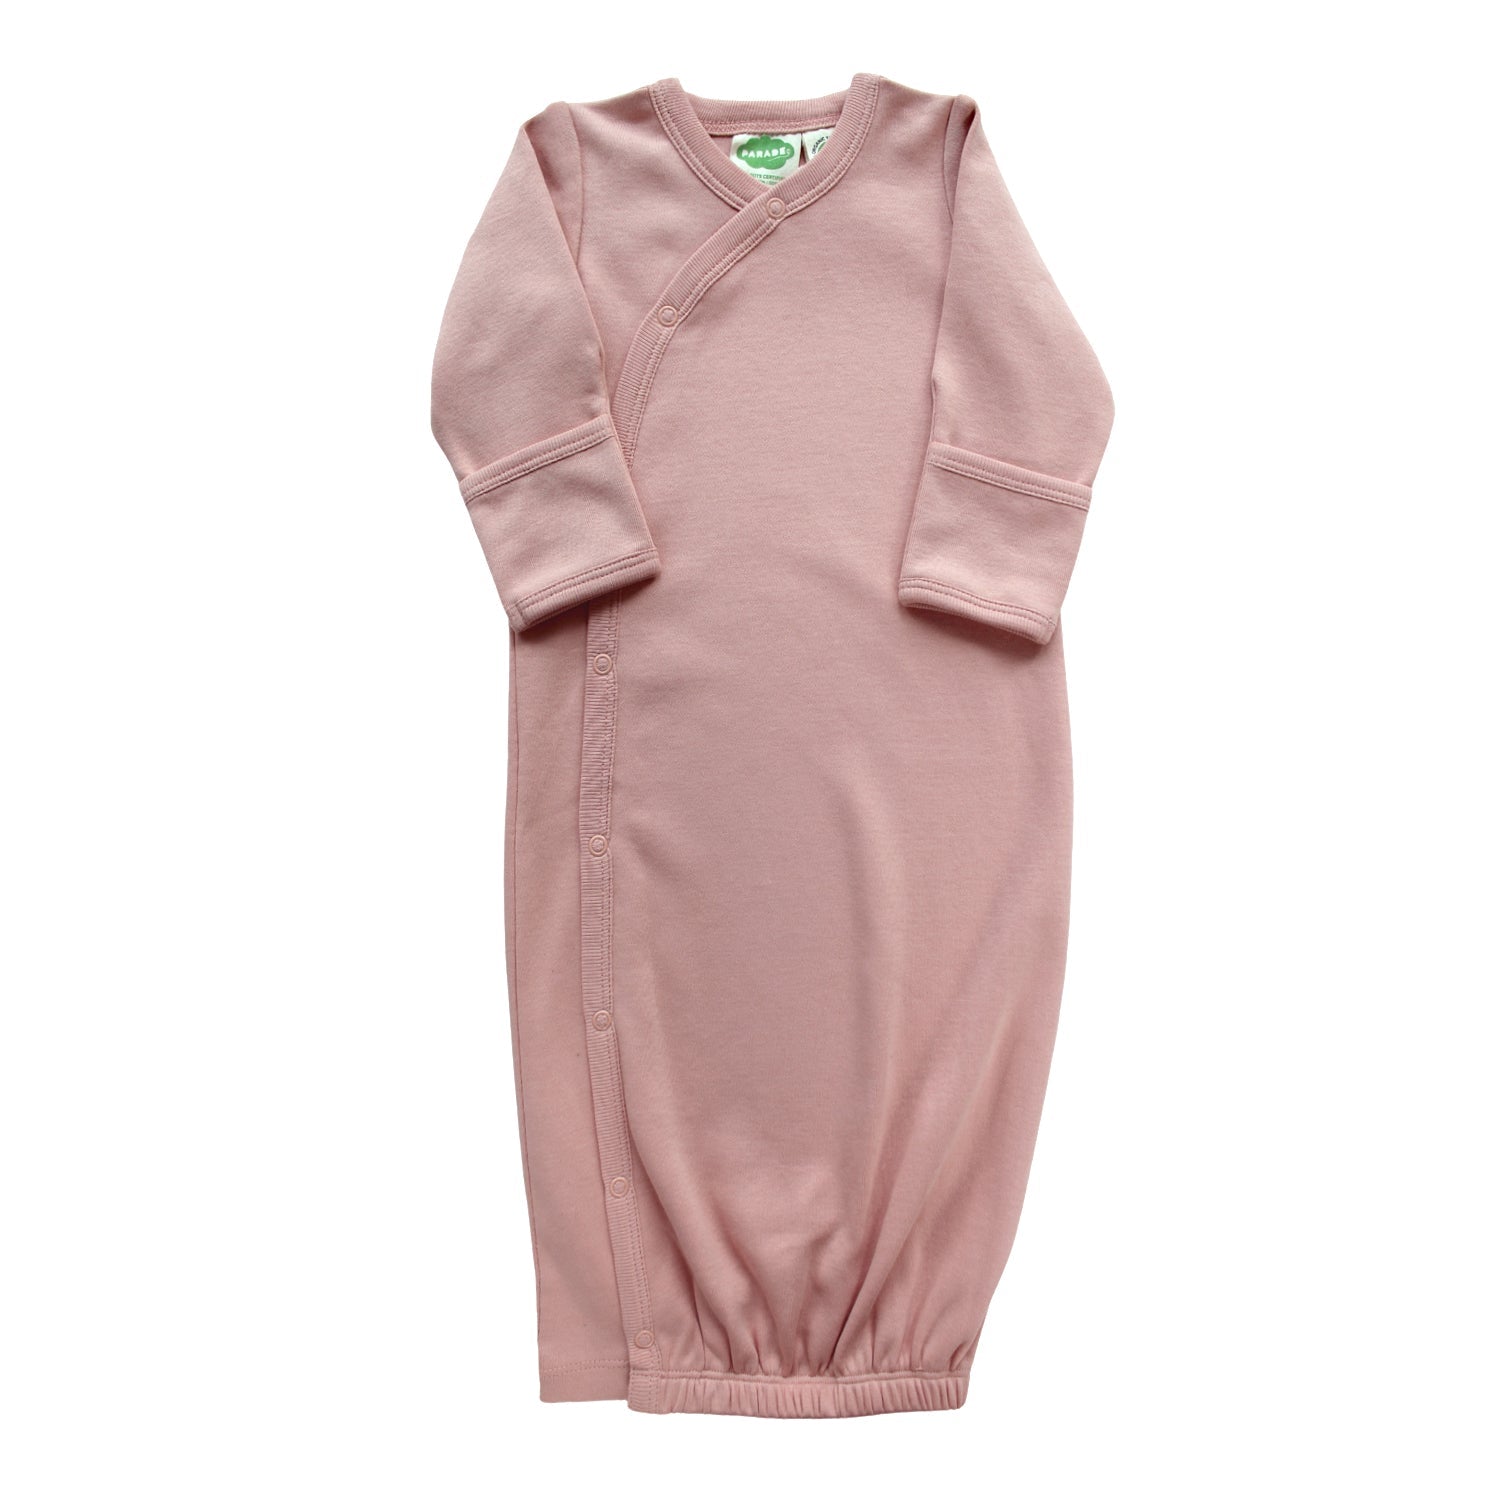 Organic Gowns - Essentials - Organic Baby Clothes, Kids Clothes, & Gifts | Parade Organics